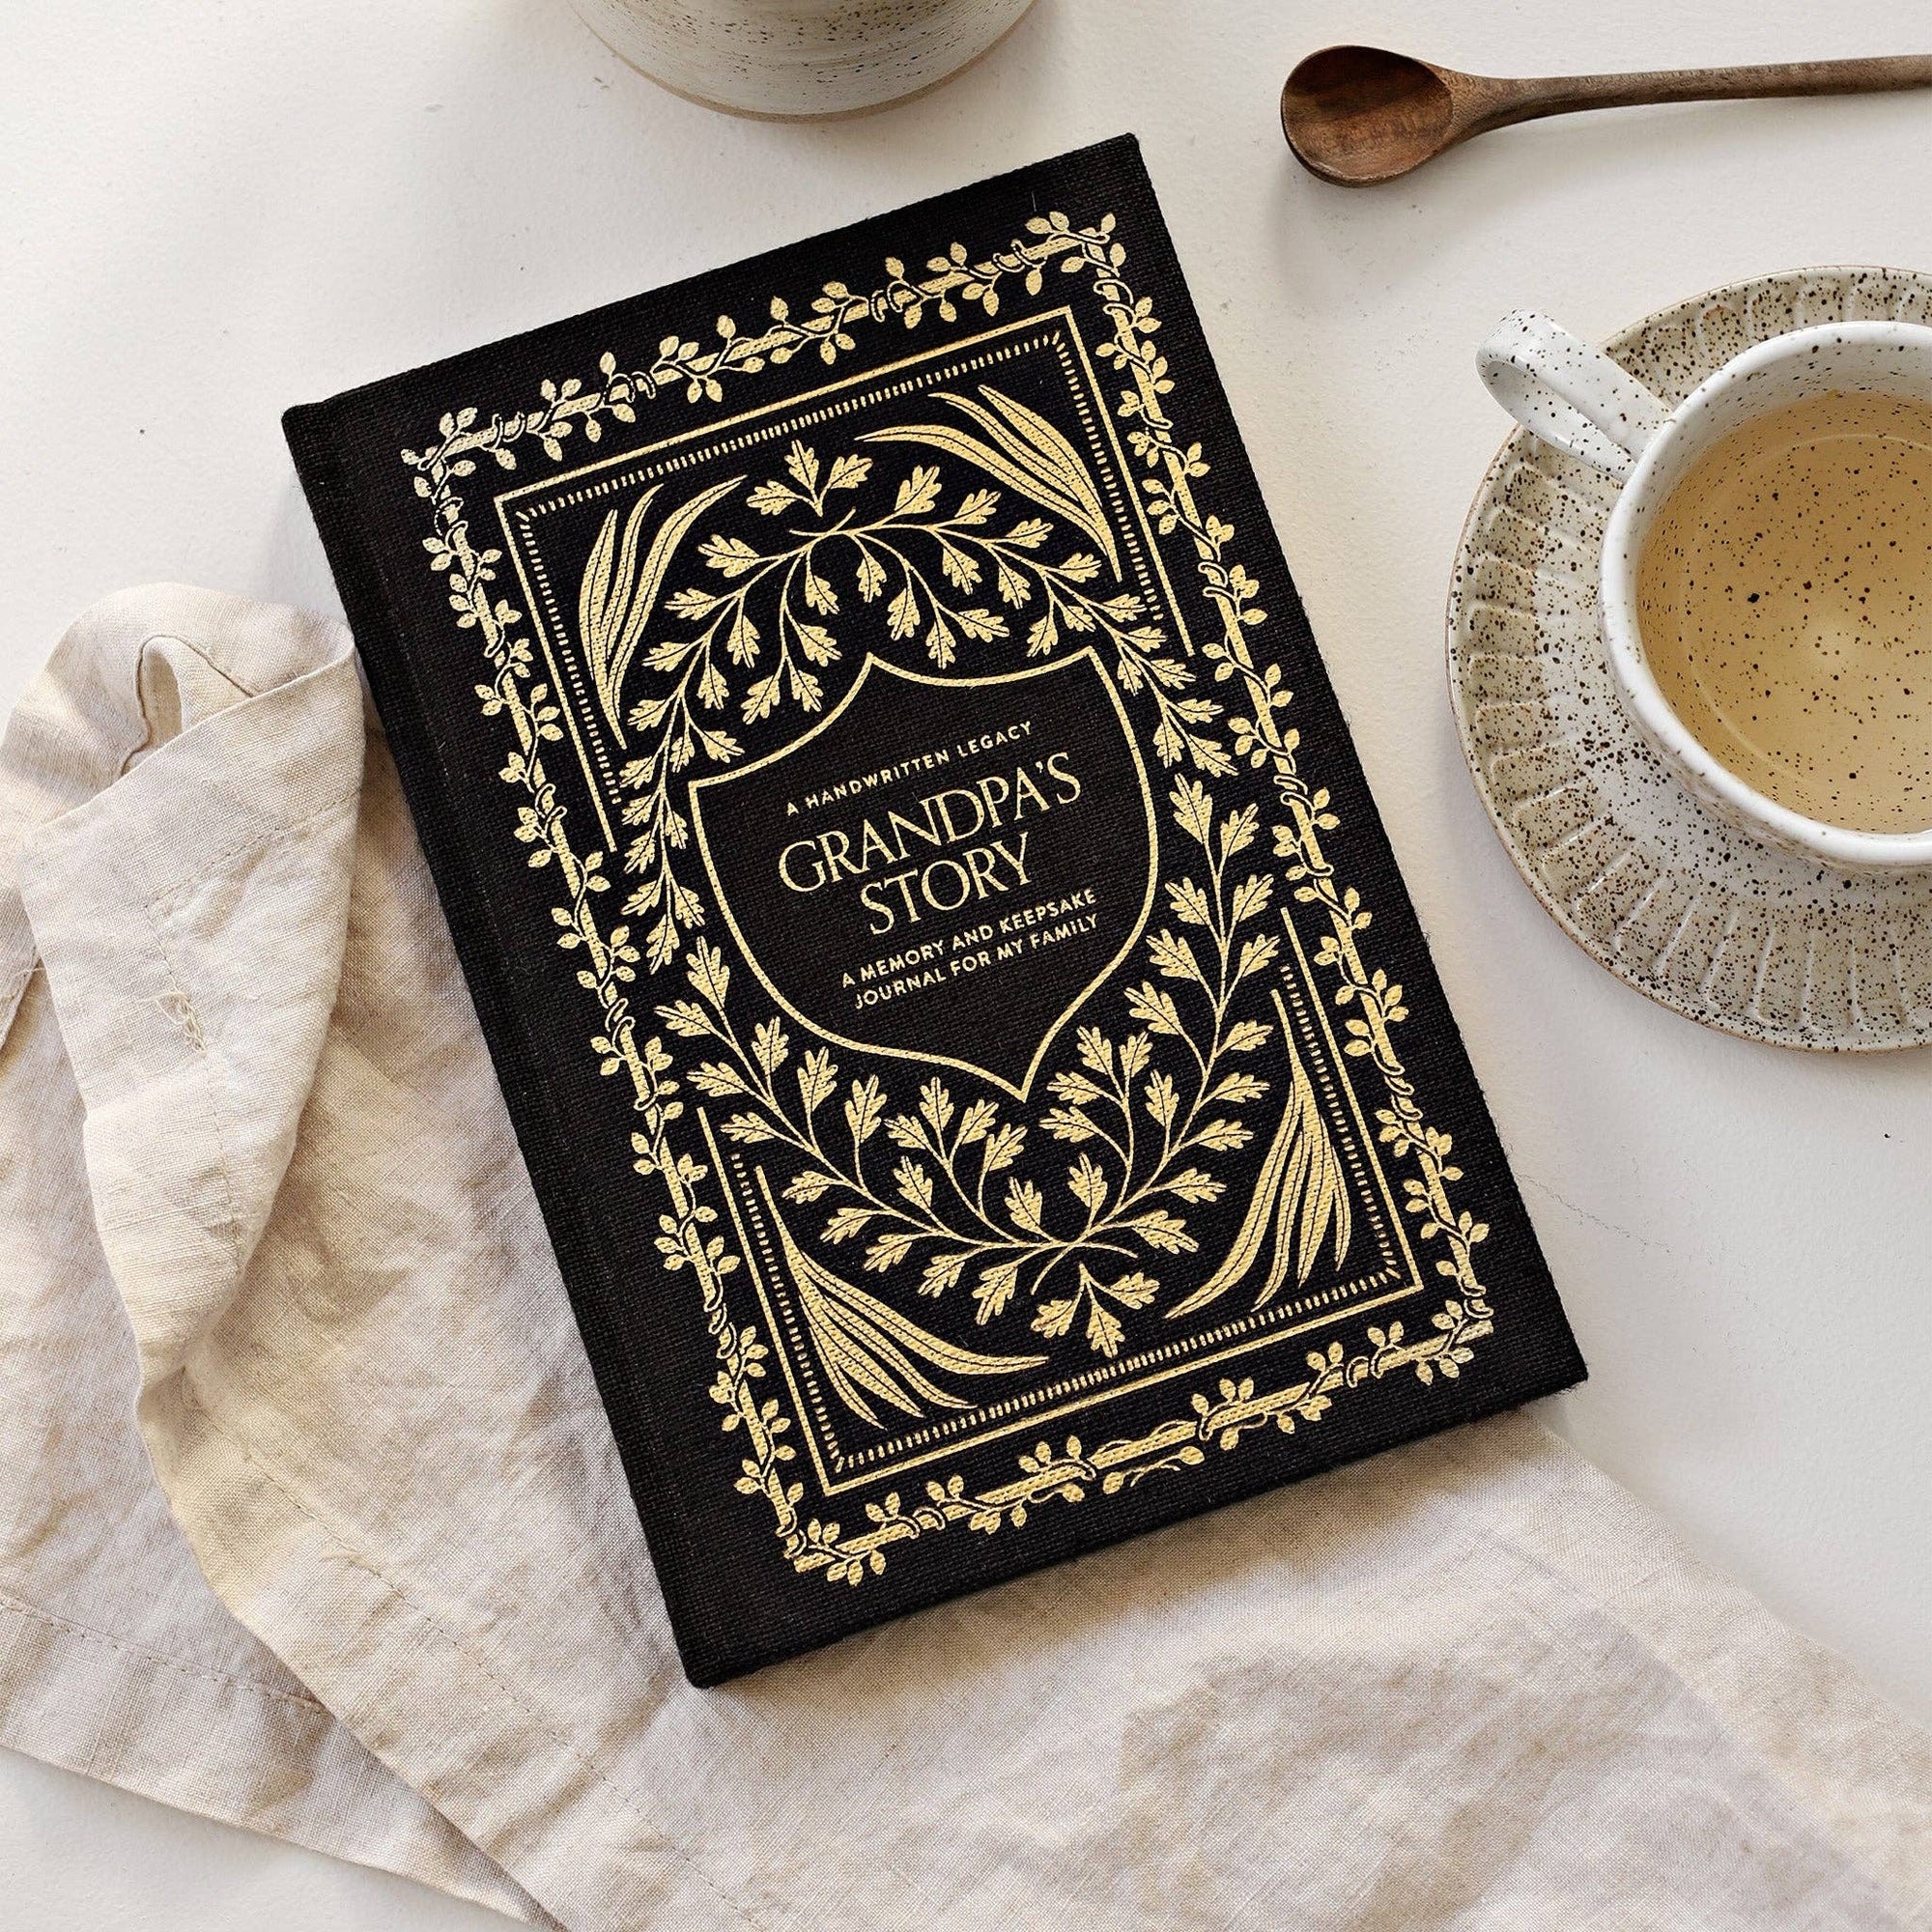 Grandpa's Story: A Memory and Keepsake Journal for My Family accompanied by a cup of coffee, perfect for recording cherished moments with grandpa through engaging writing prompts.